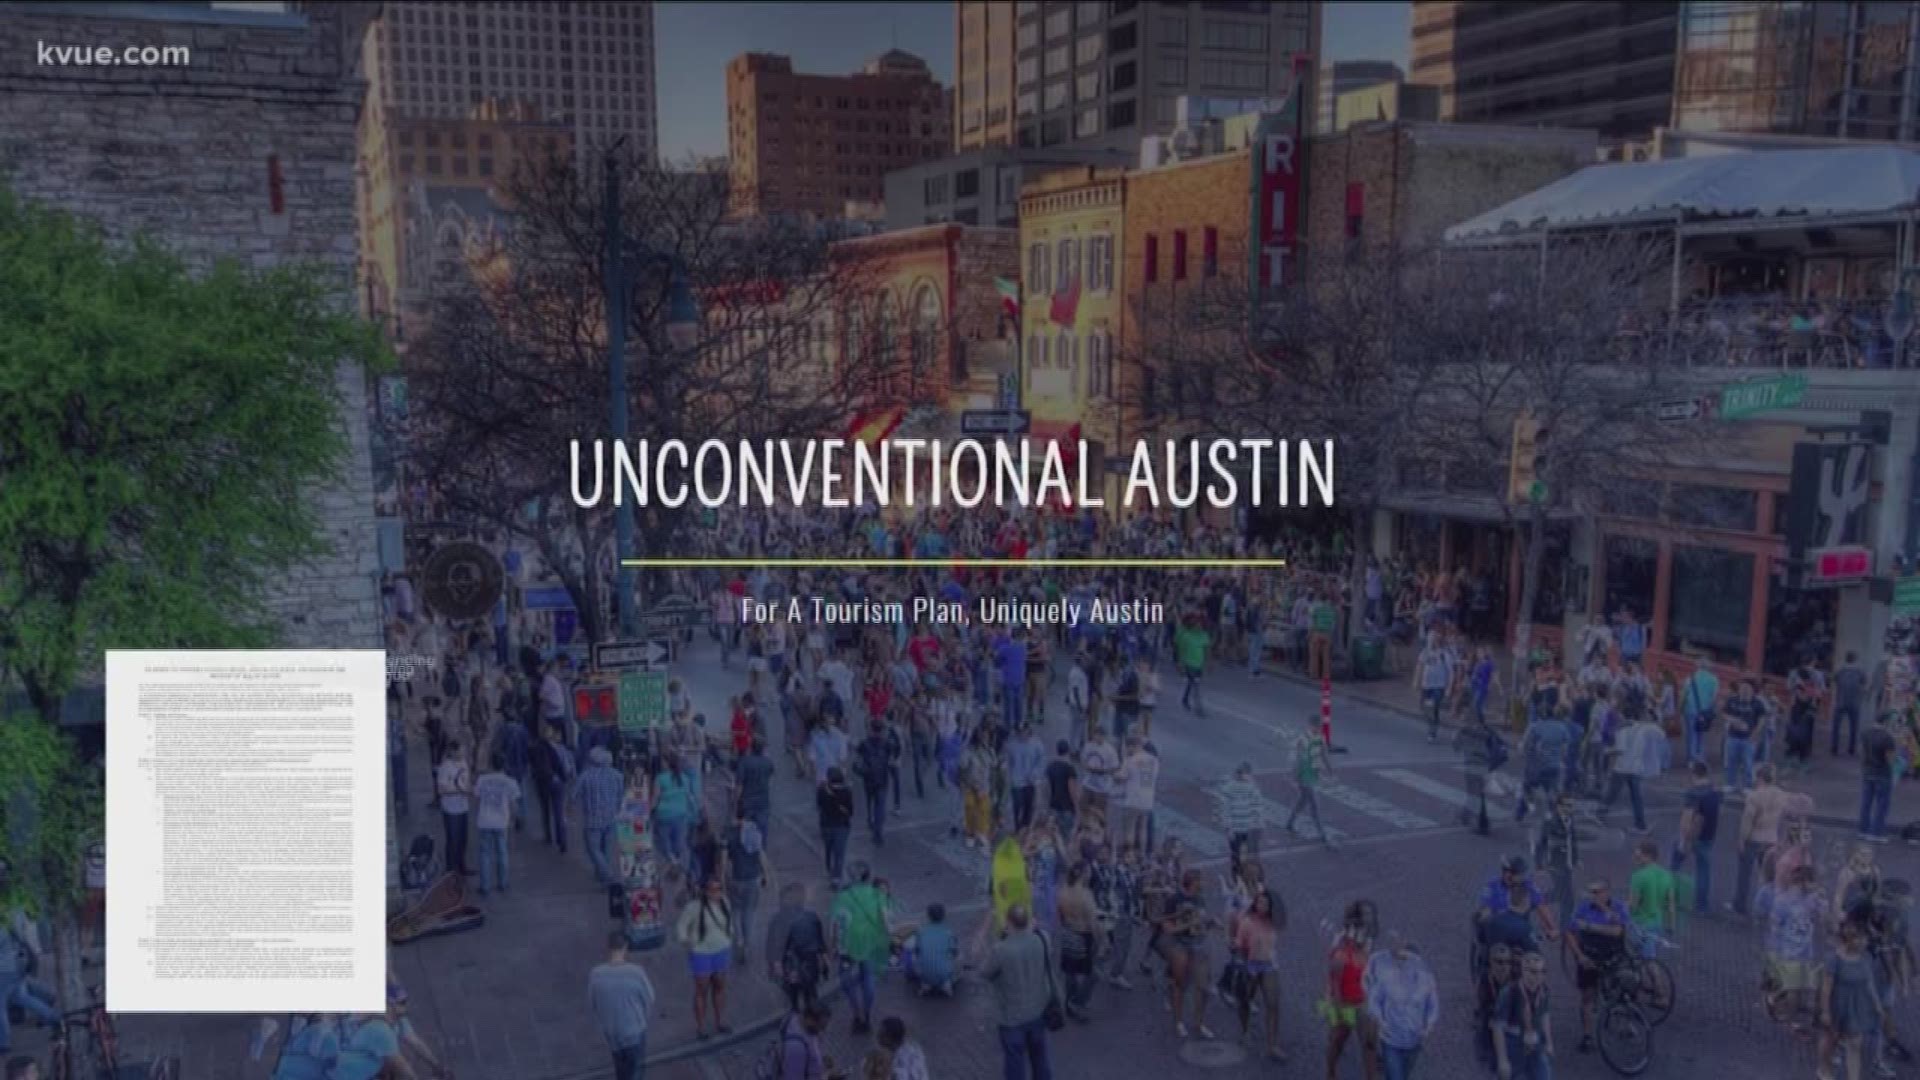 A petition delivered to City Hall on Friday is calling for a public vote when it comes to expanding Austin's convention center.